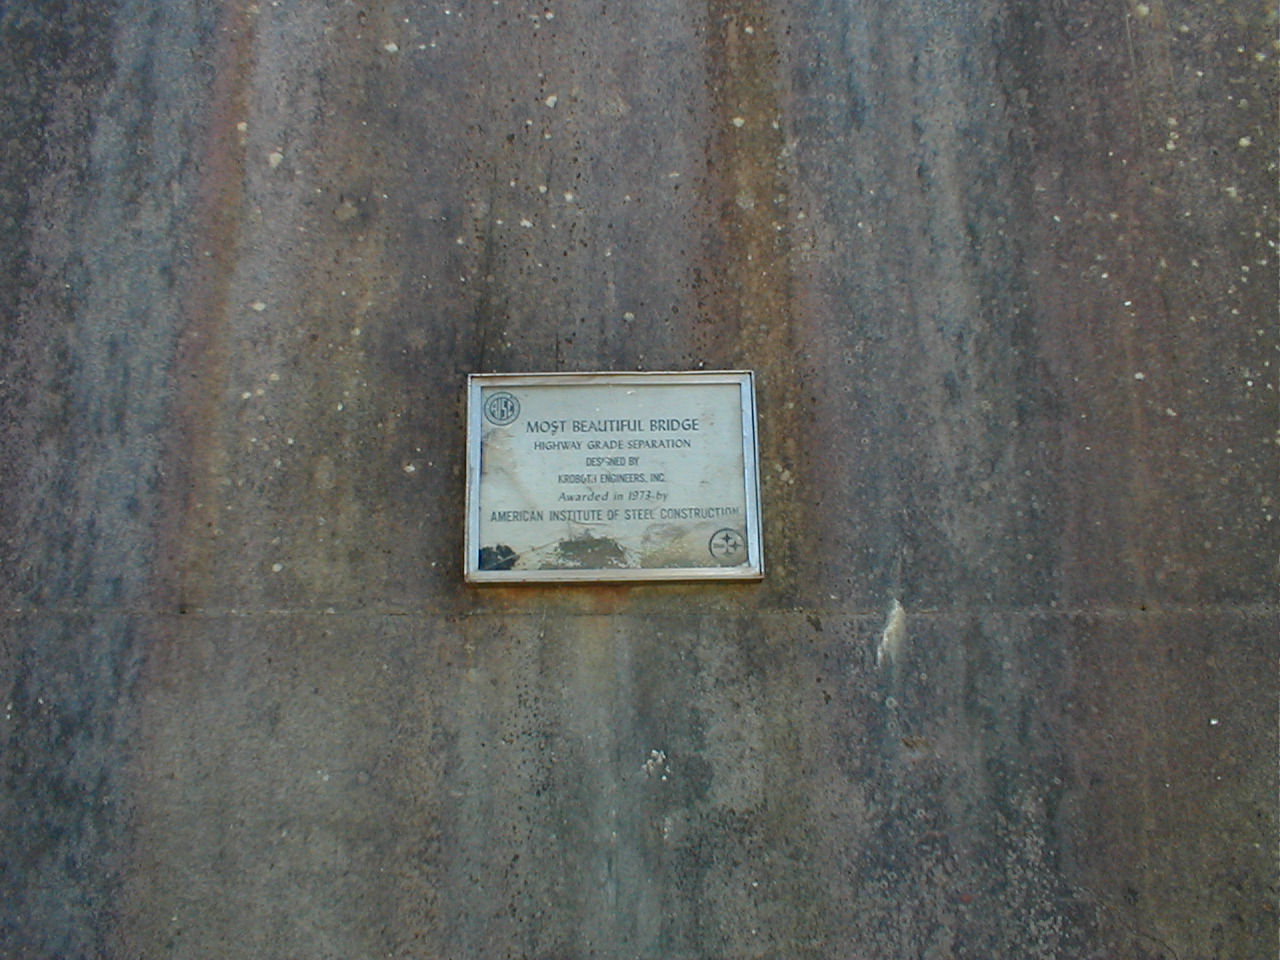 A view of the plaque showing the 1973 award.